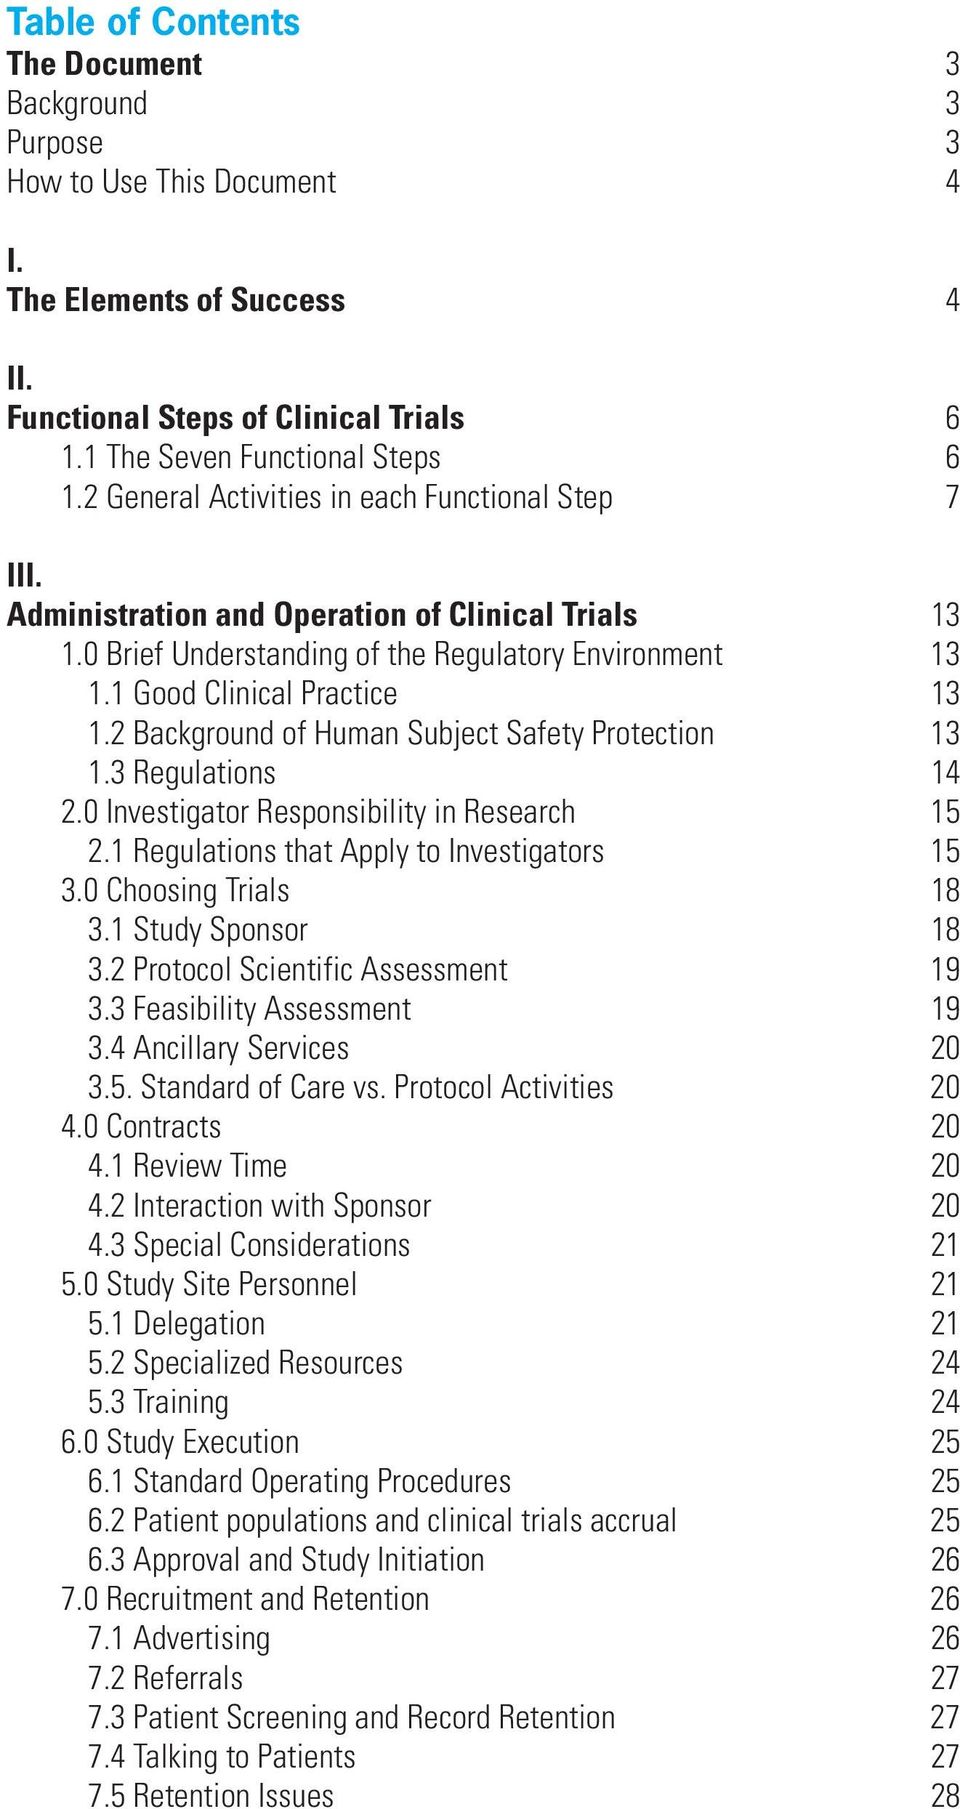 2 Background of Human Subject Safety Protection 13 1.3 Regulations 14 2.0 Investigator Responsibility in Research 15 2.1 Regulations that Apply to Investigators 15 3.0 Choosing Trials 18 3.